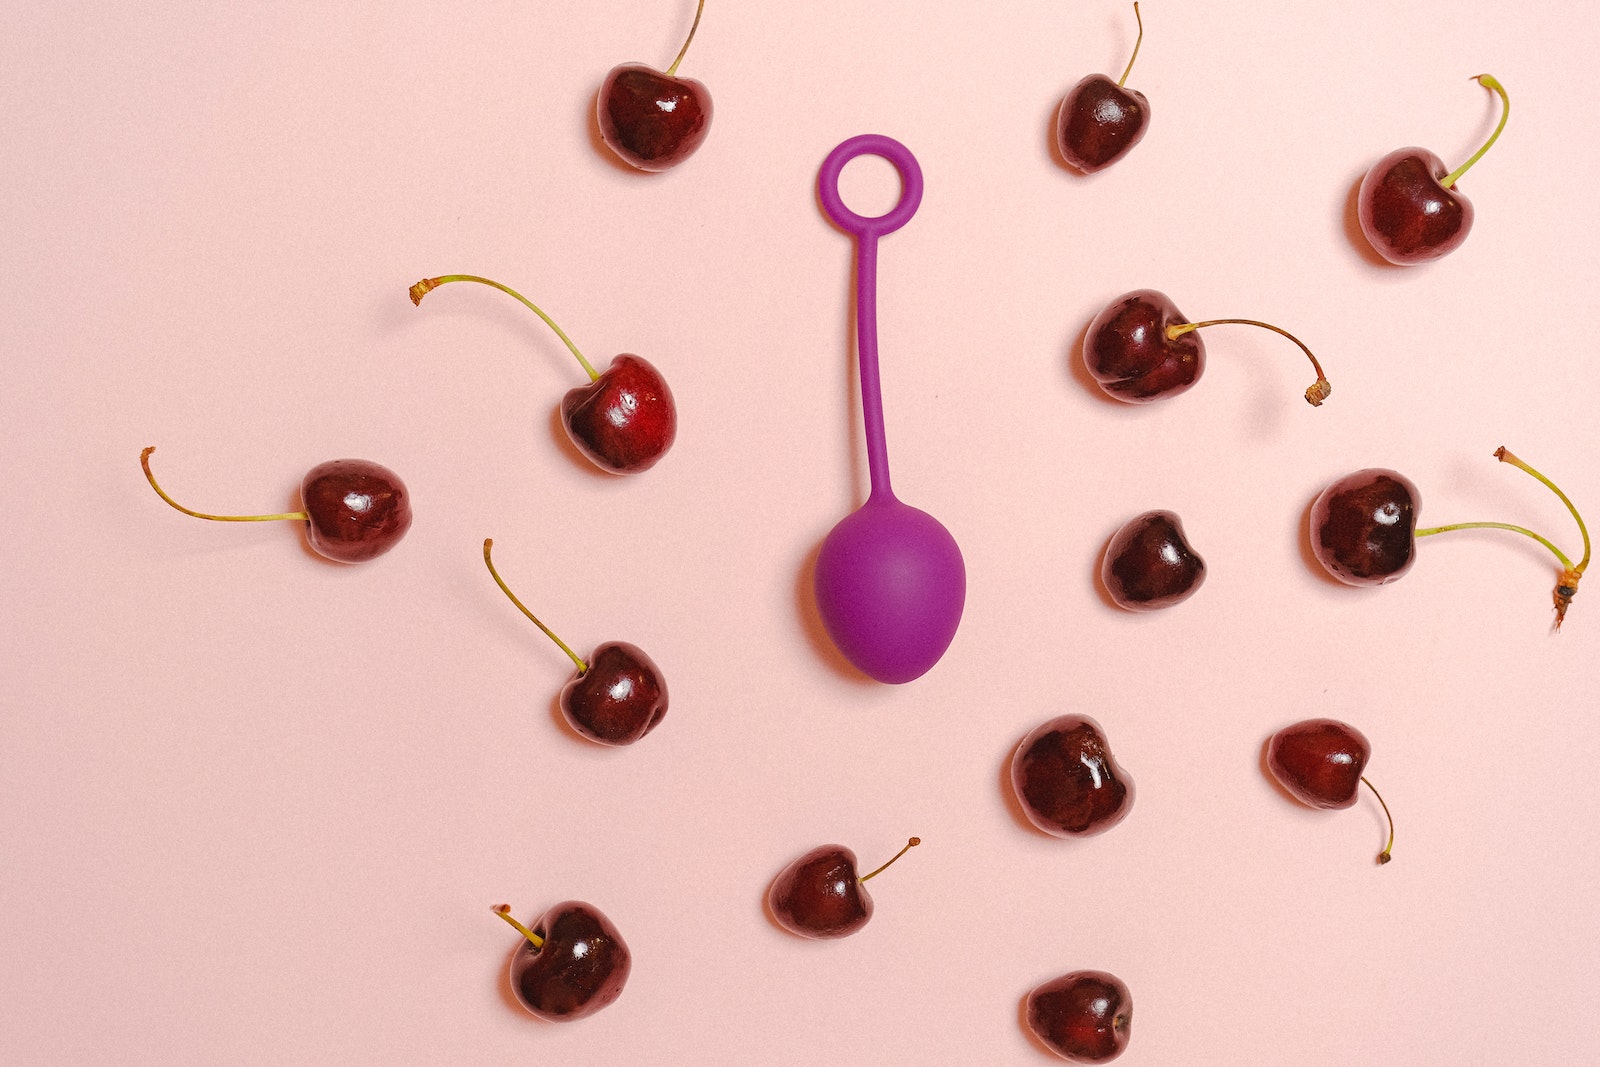 Sex Toy and Cherries